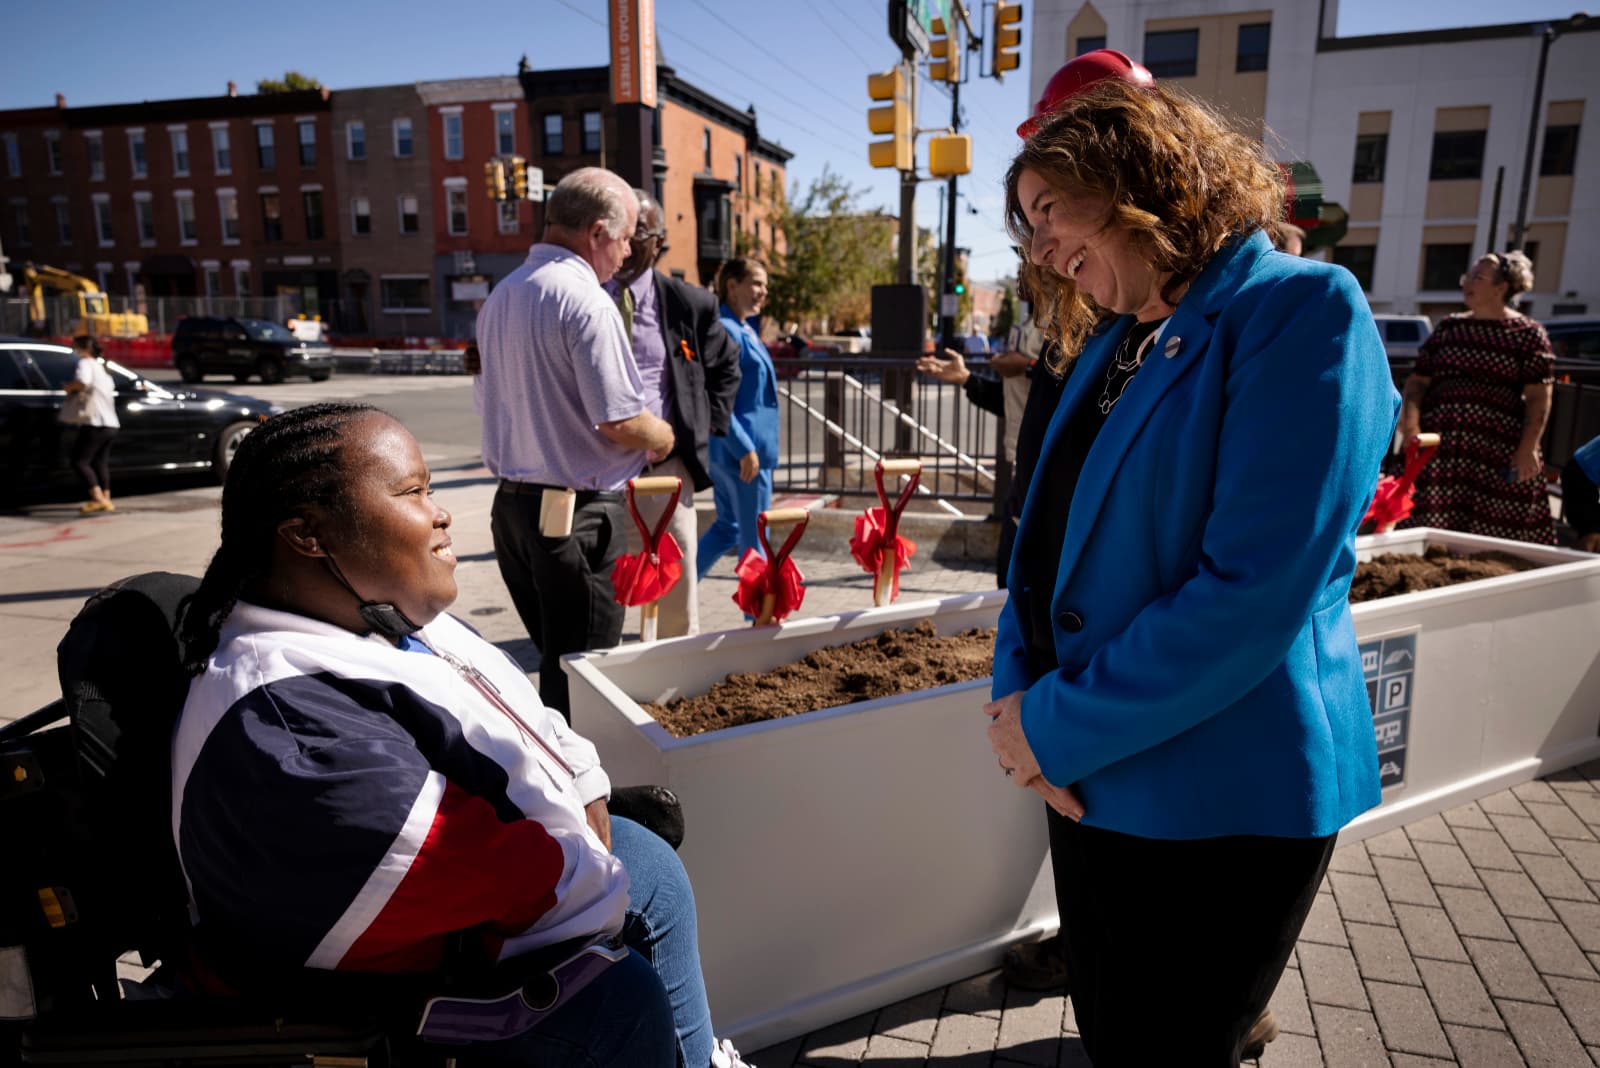 LaToya, a Black woman using a wheelchair on a Philadelphia sidewalk, smiles with a woman next to a large planter filled with fresh soil, ceremonial shovels with red bows leaning against it